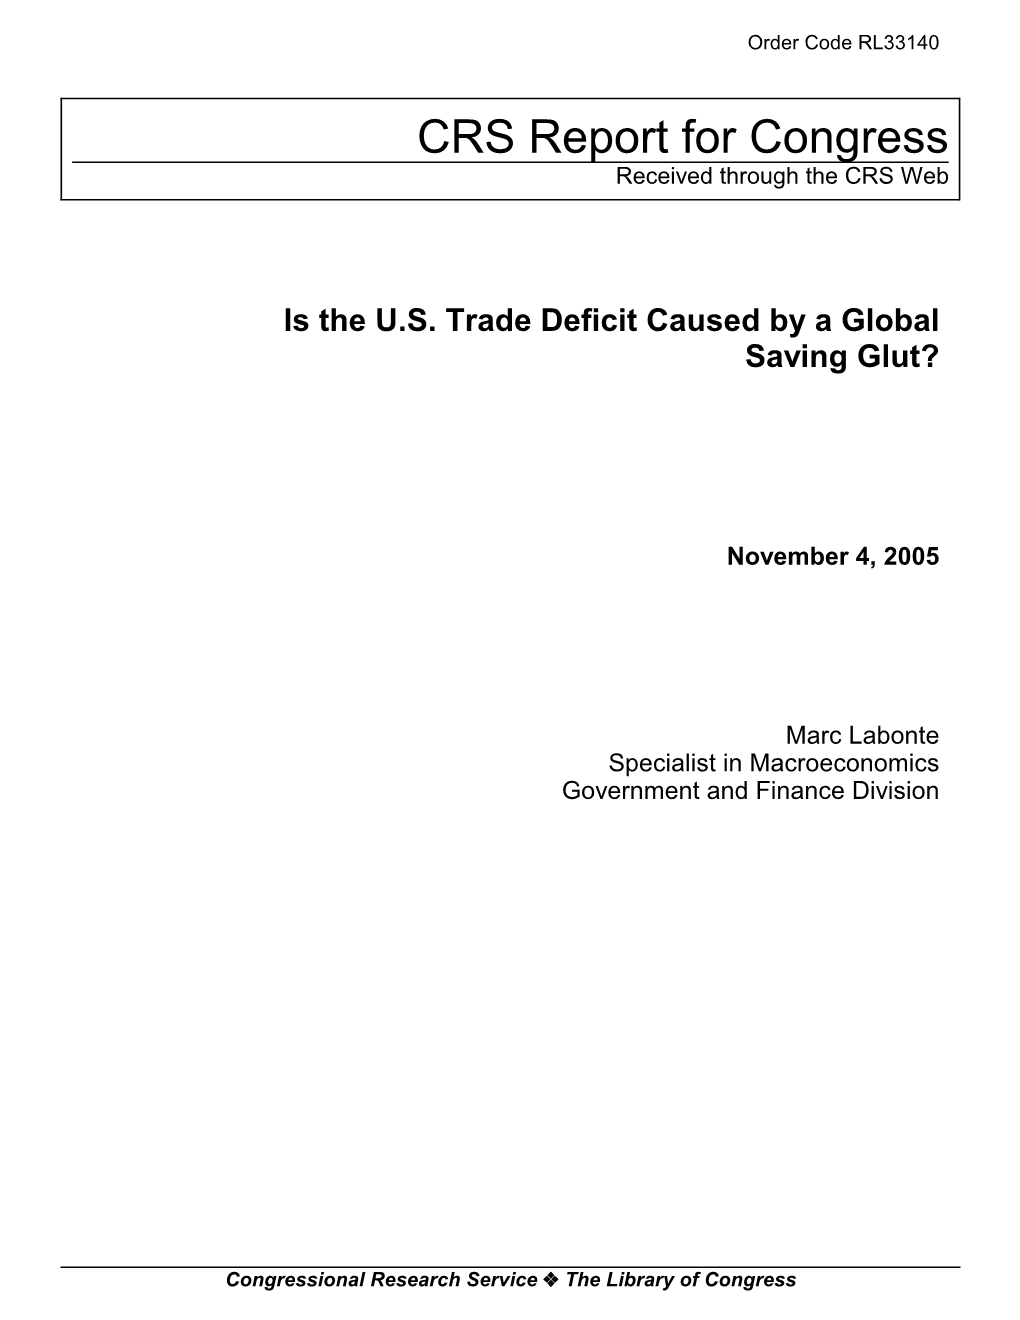 Is the U.S. Trade Deficit Caused by a Global Saving Glut?